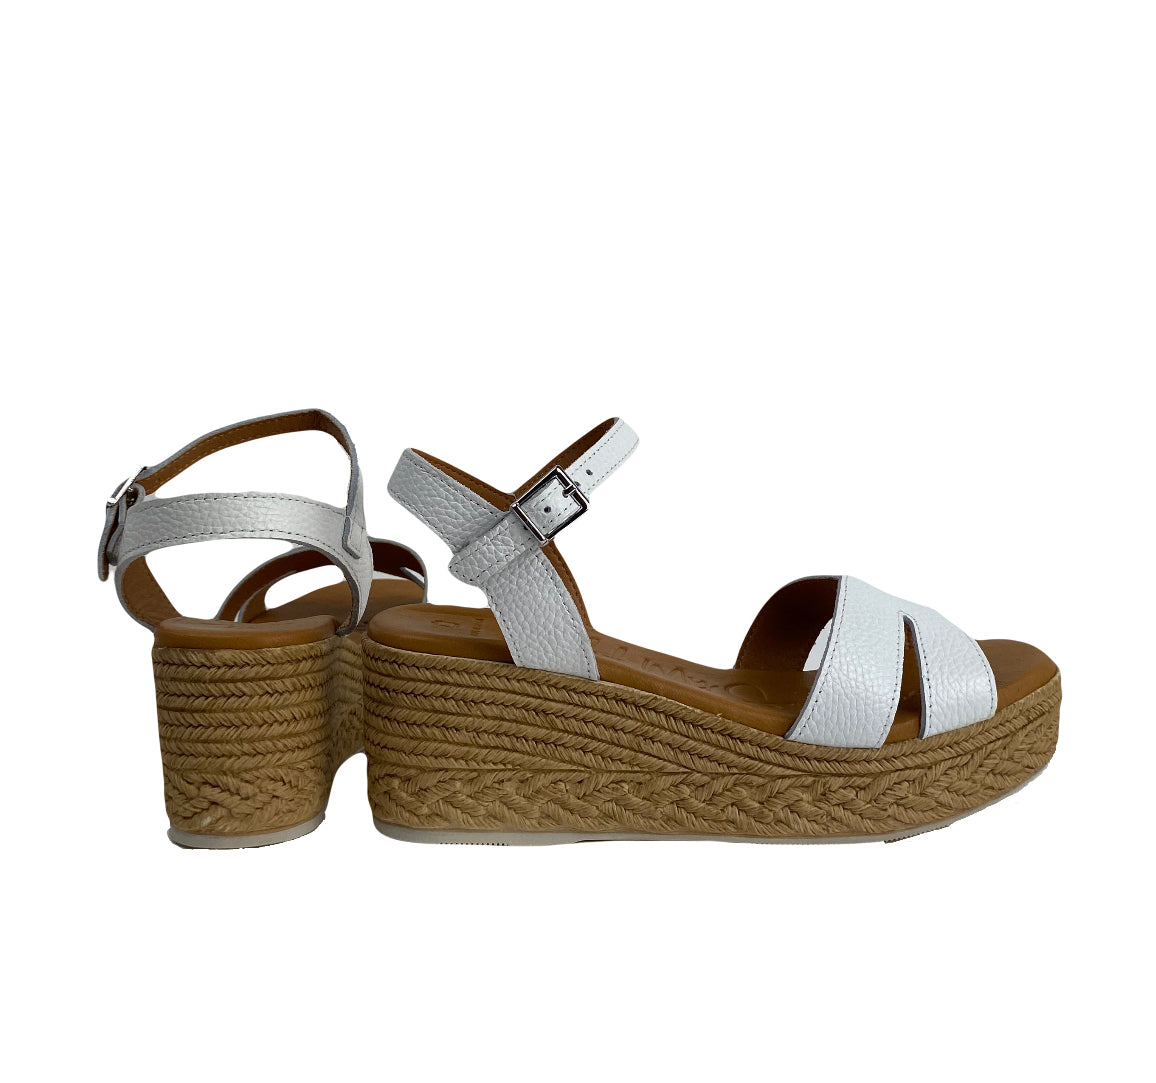 Oh My Sandals - 5451 White Wedge Sandal